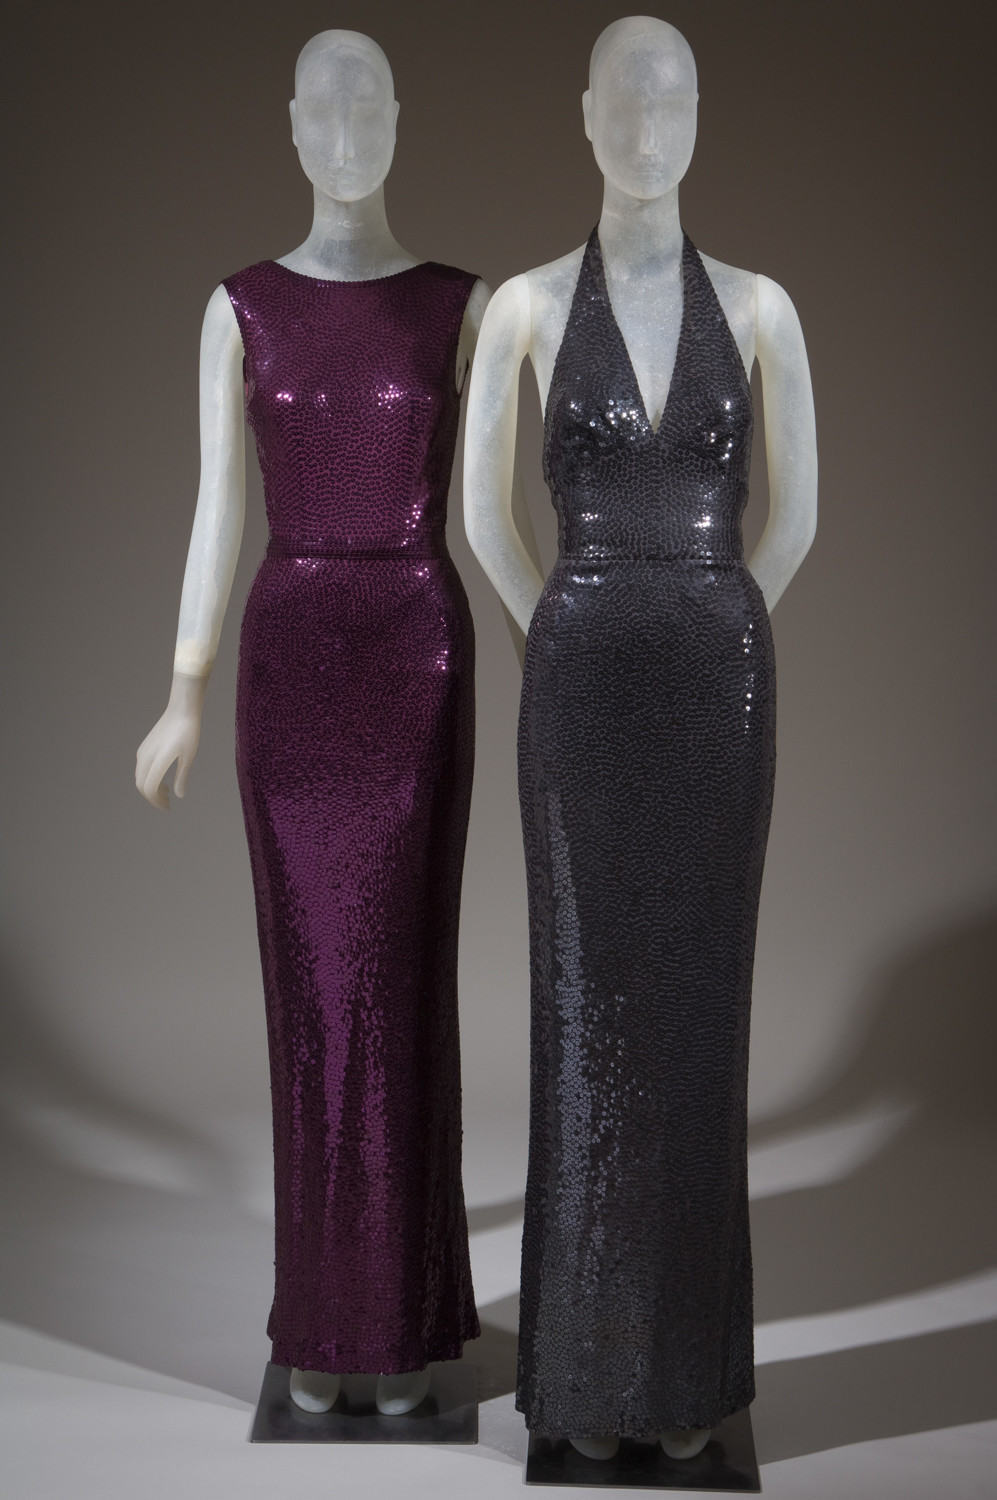 American fashion designer Norman Norell might have been best known for his ‘mermaid’ gowns, which included a strong use of sequins. These are two out of the roughly 100 pieces by the designer on display between Feb. 9 and April 14, part of an exhibition on Norell.